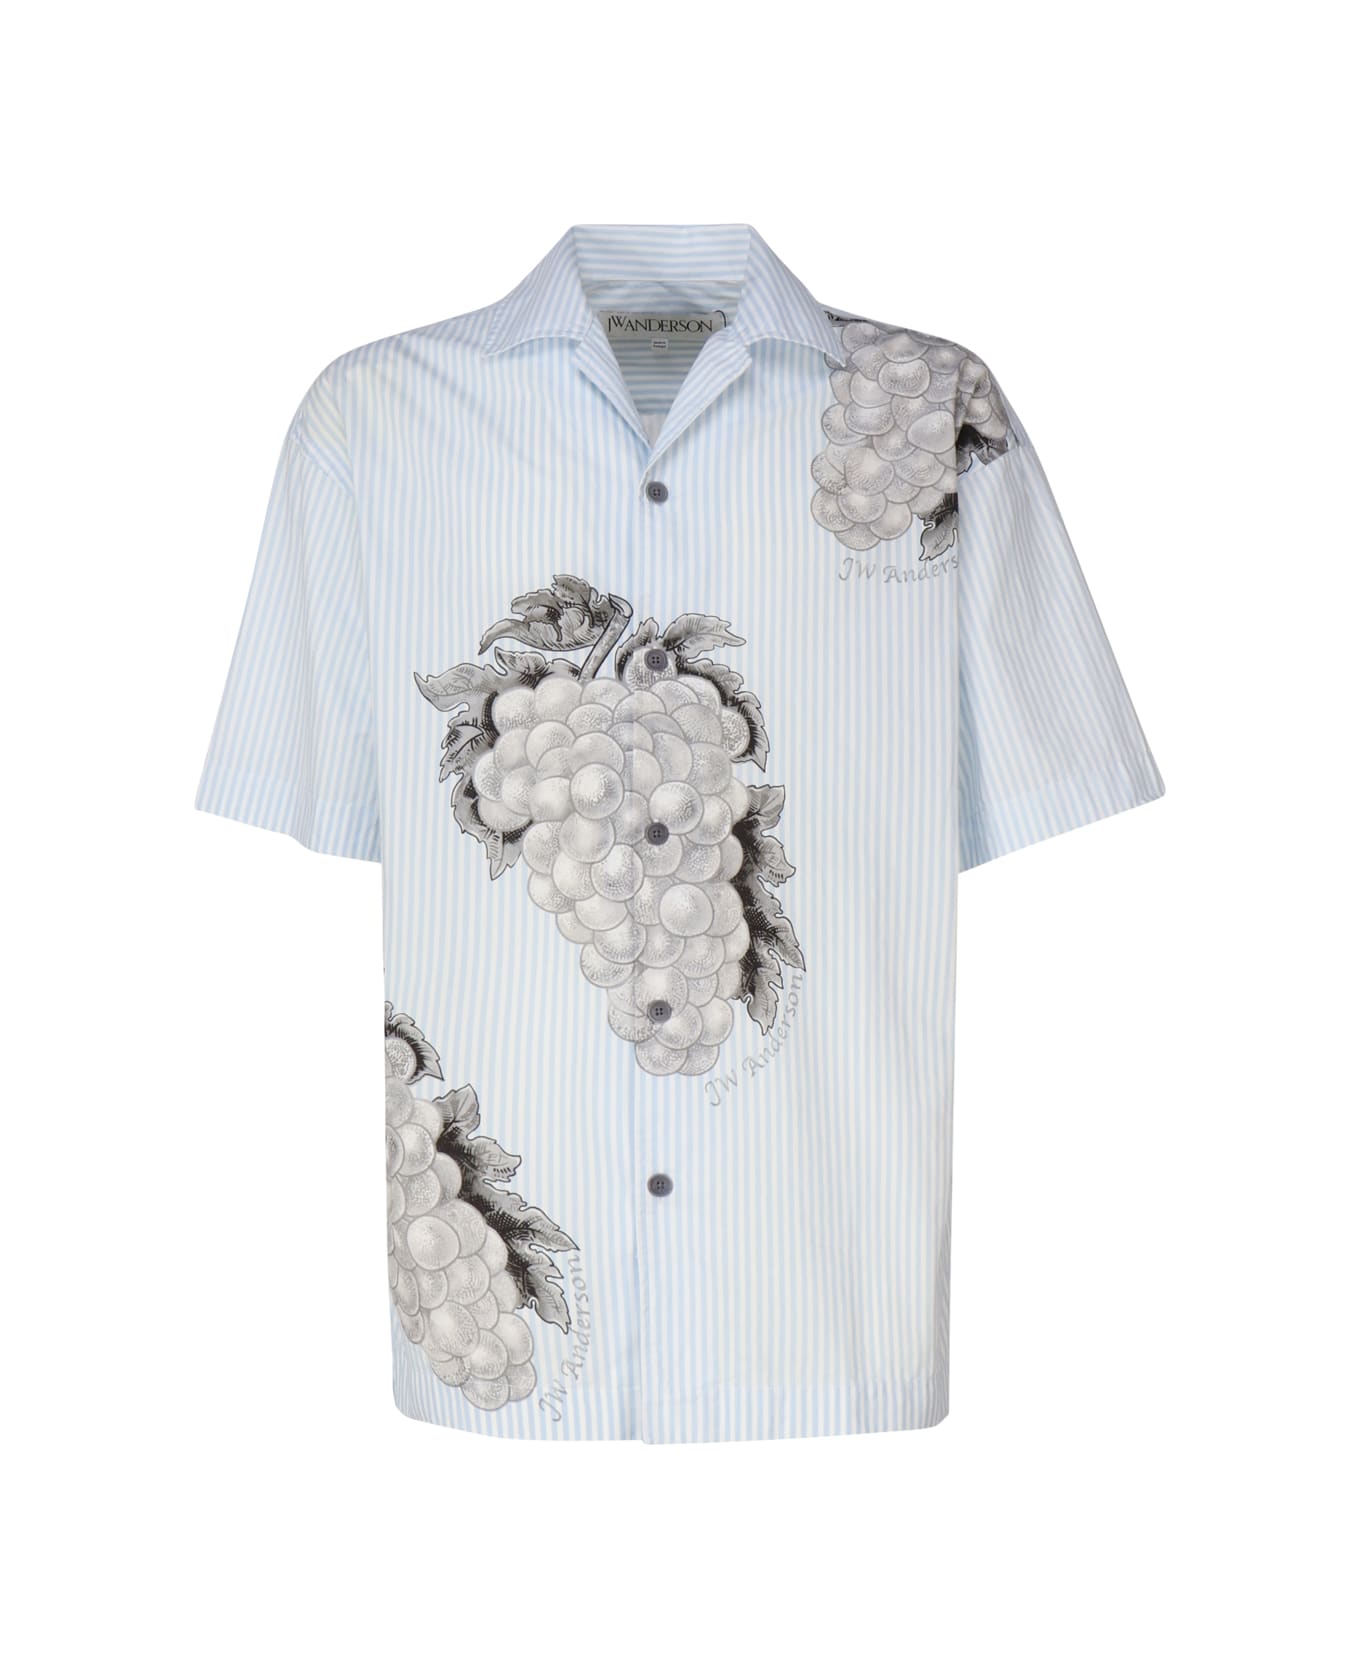 J.W. Anderson Shirt With Print - Light blue シャツ